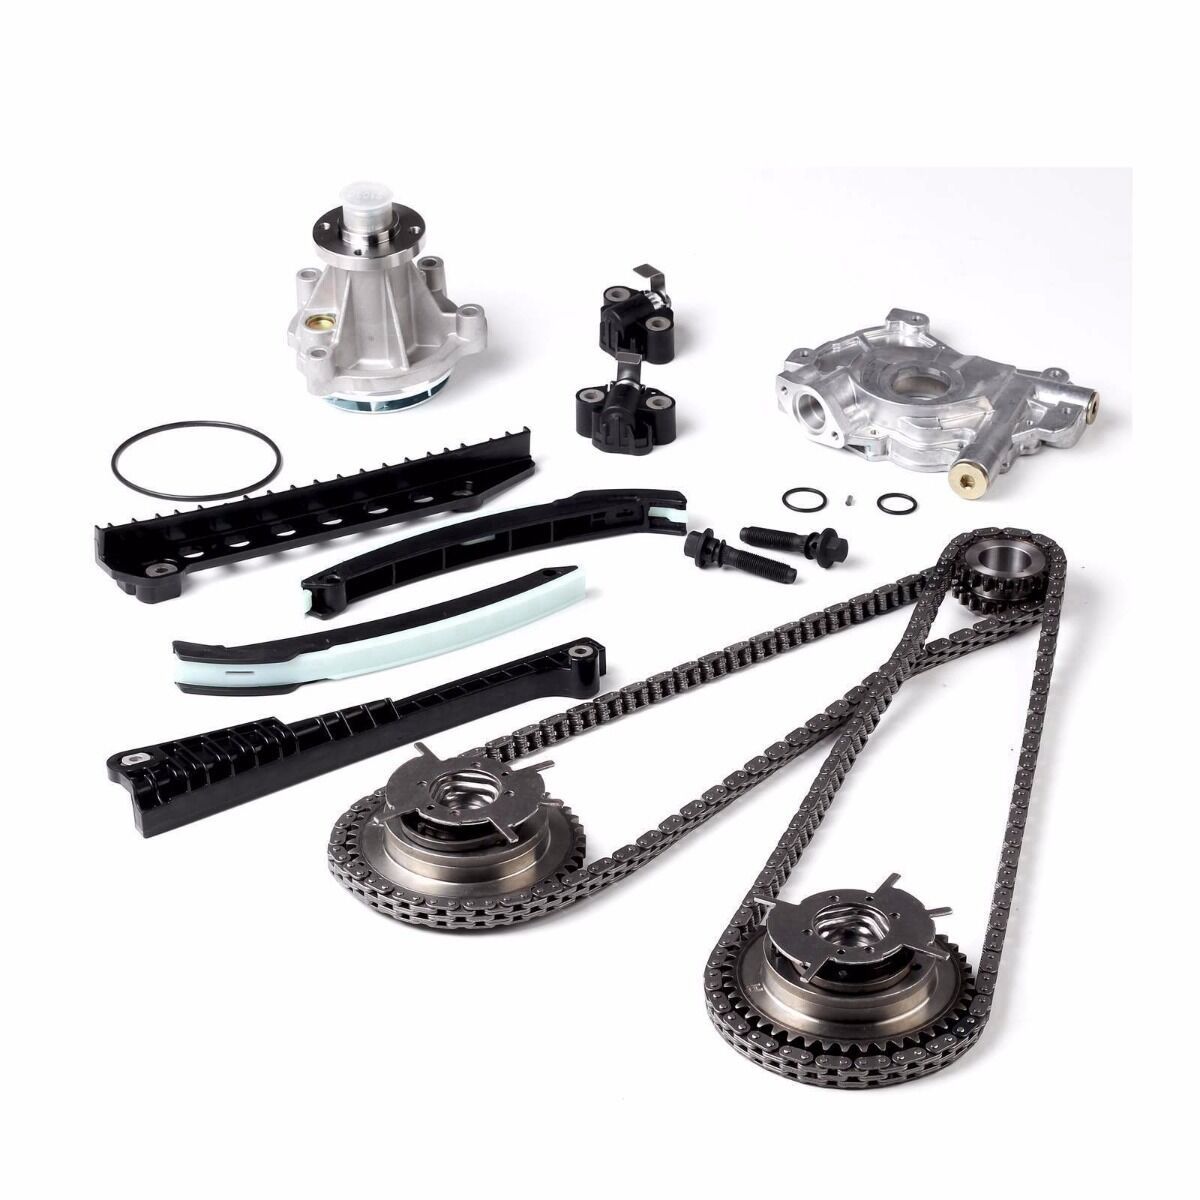 Timing Chain kit Oil&Water Pump+Cam Phasers For Ford F150 Lincoln 5.4L 2004-2008